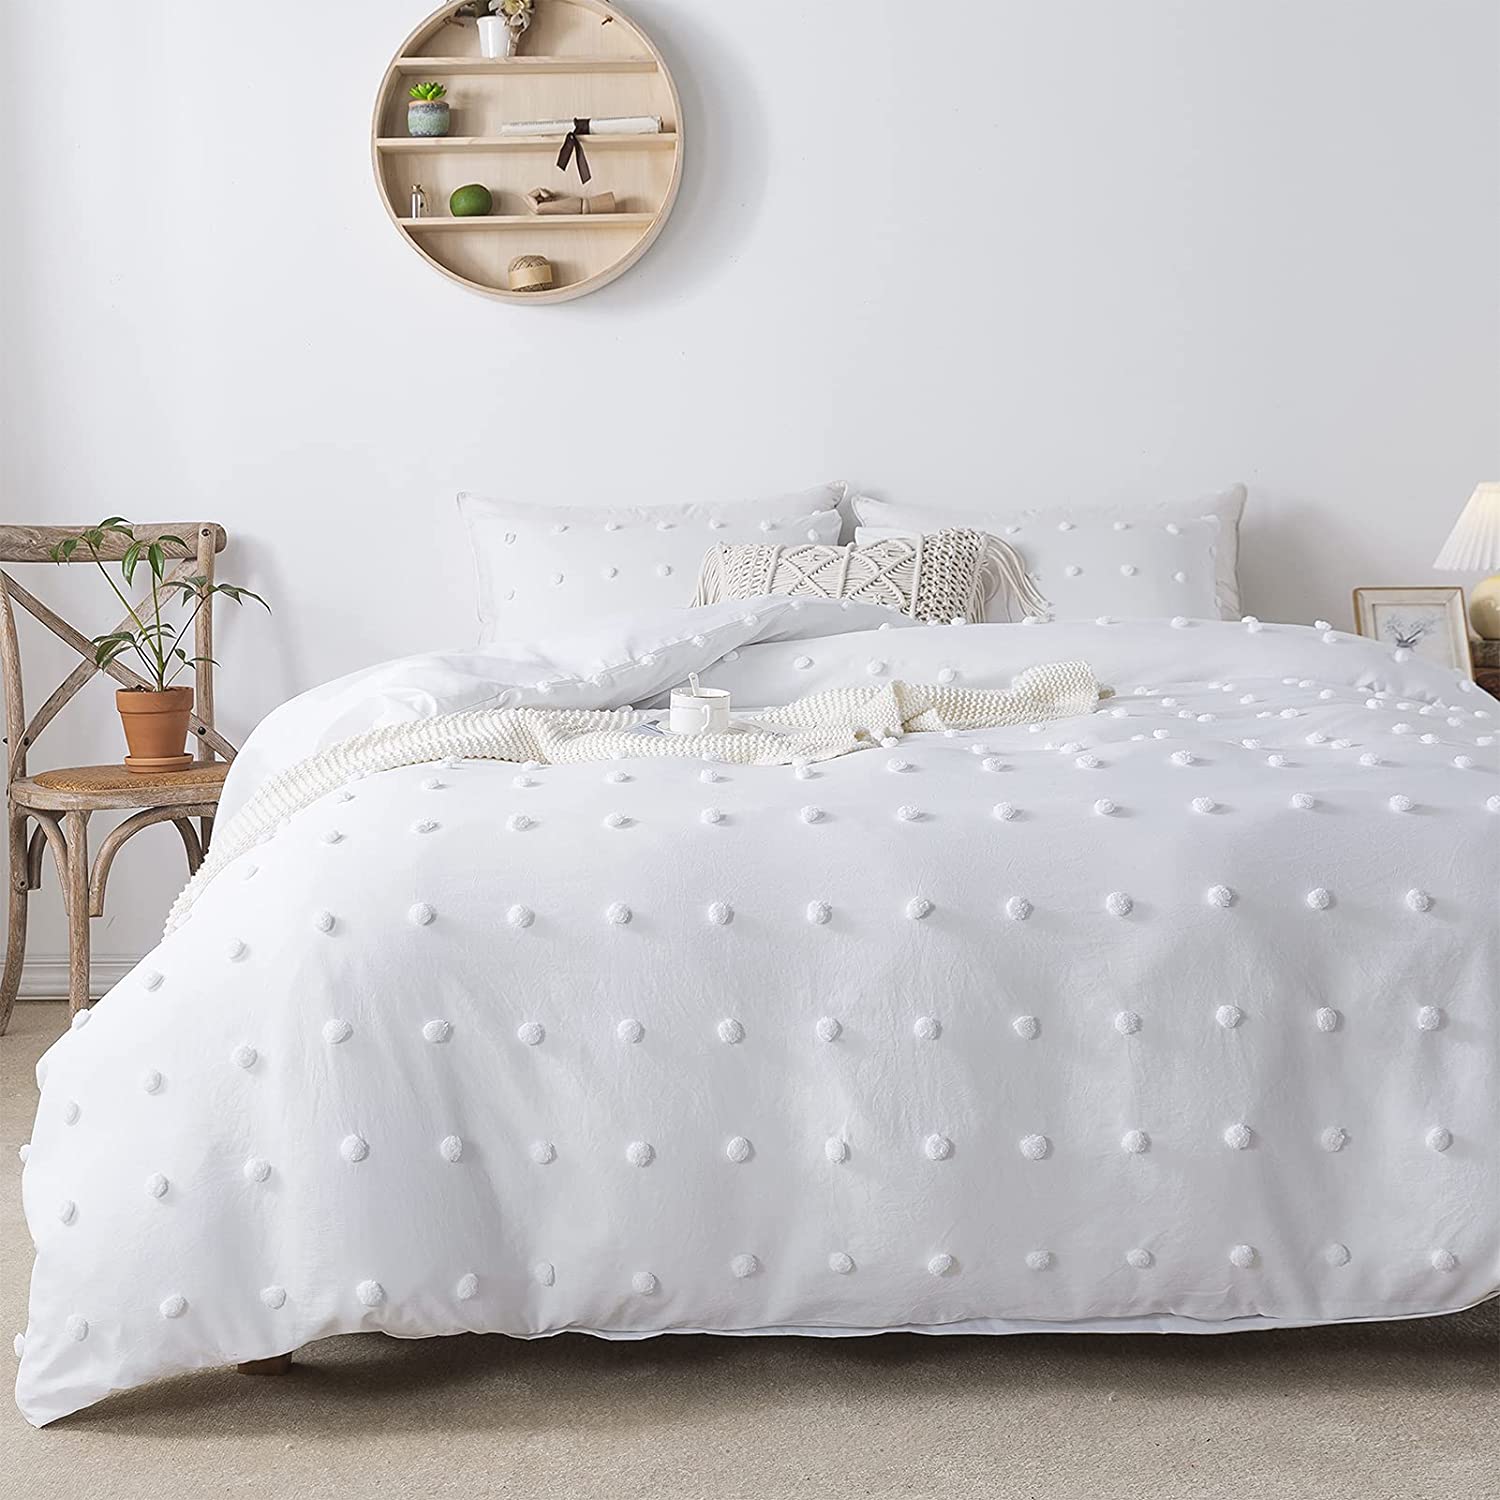 Andency White Tufted Dot Duvet Cover Full Size (79x90 inch), 3 Pieces (1  Jacquar